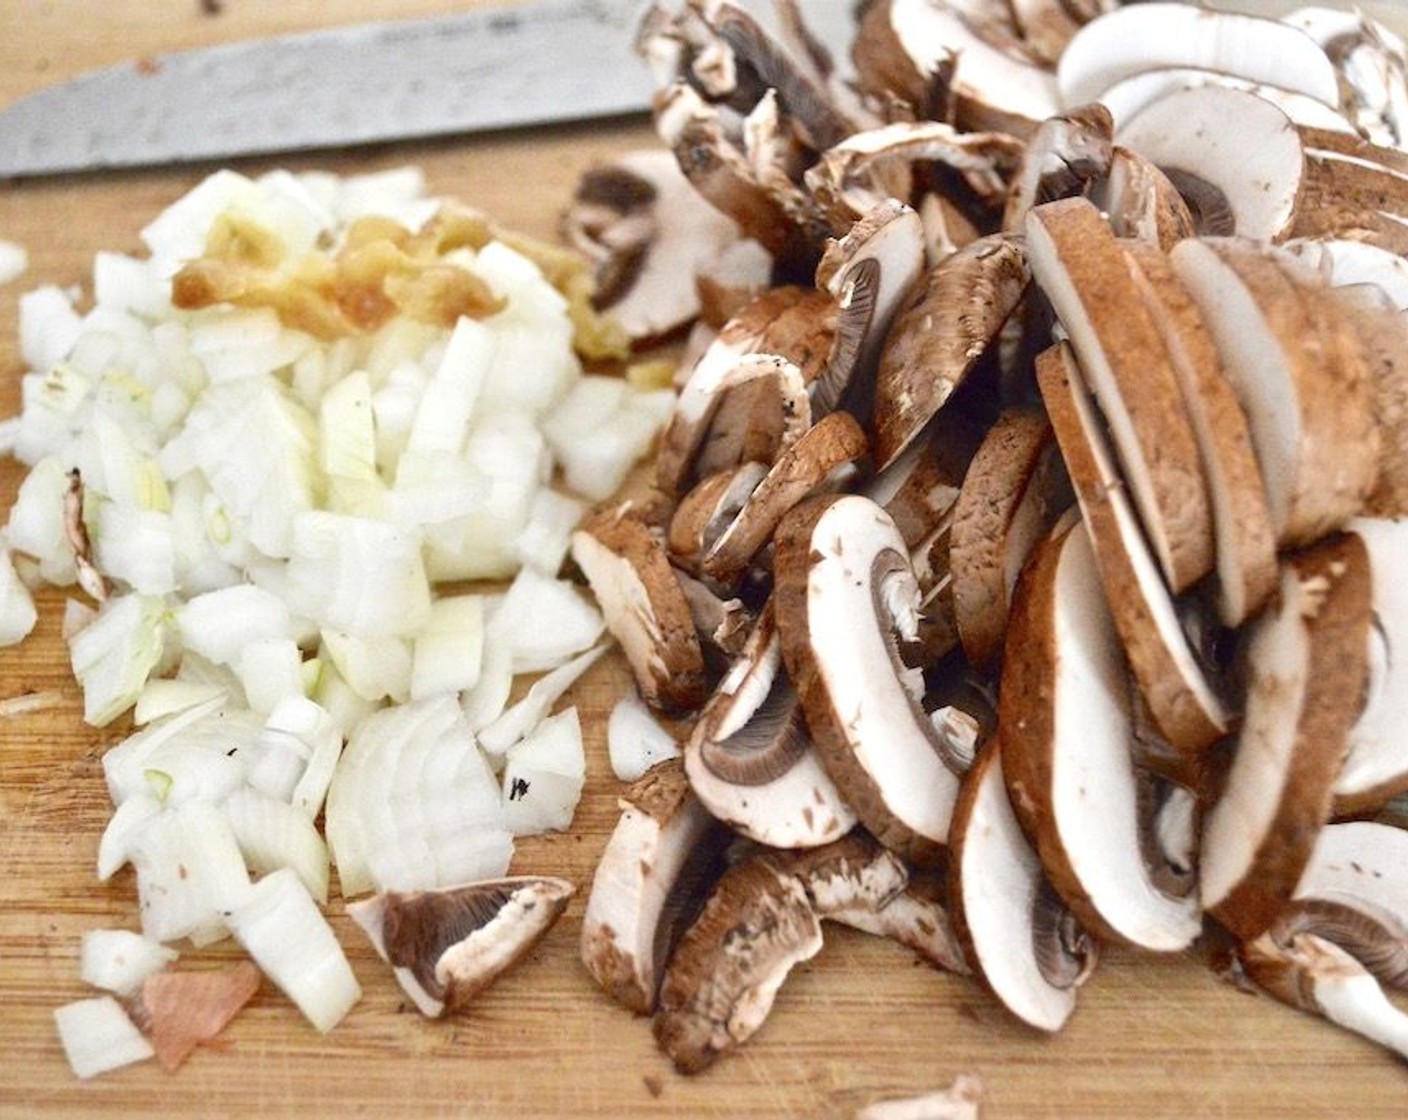 step 4 Add Cremini Mushrooms (2 3/4 cups), Onion (1), and Garlic (4 cloves) to the pan and let them cook for 3 minutes or so to soften and become fragrant.